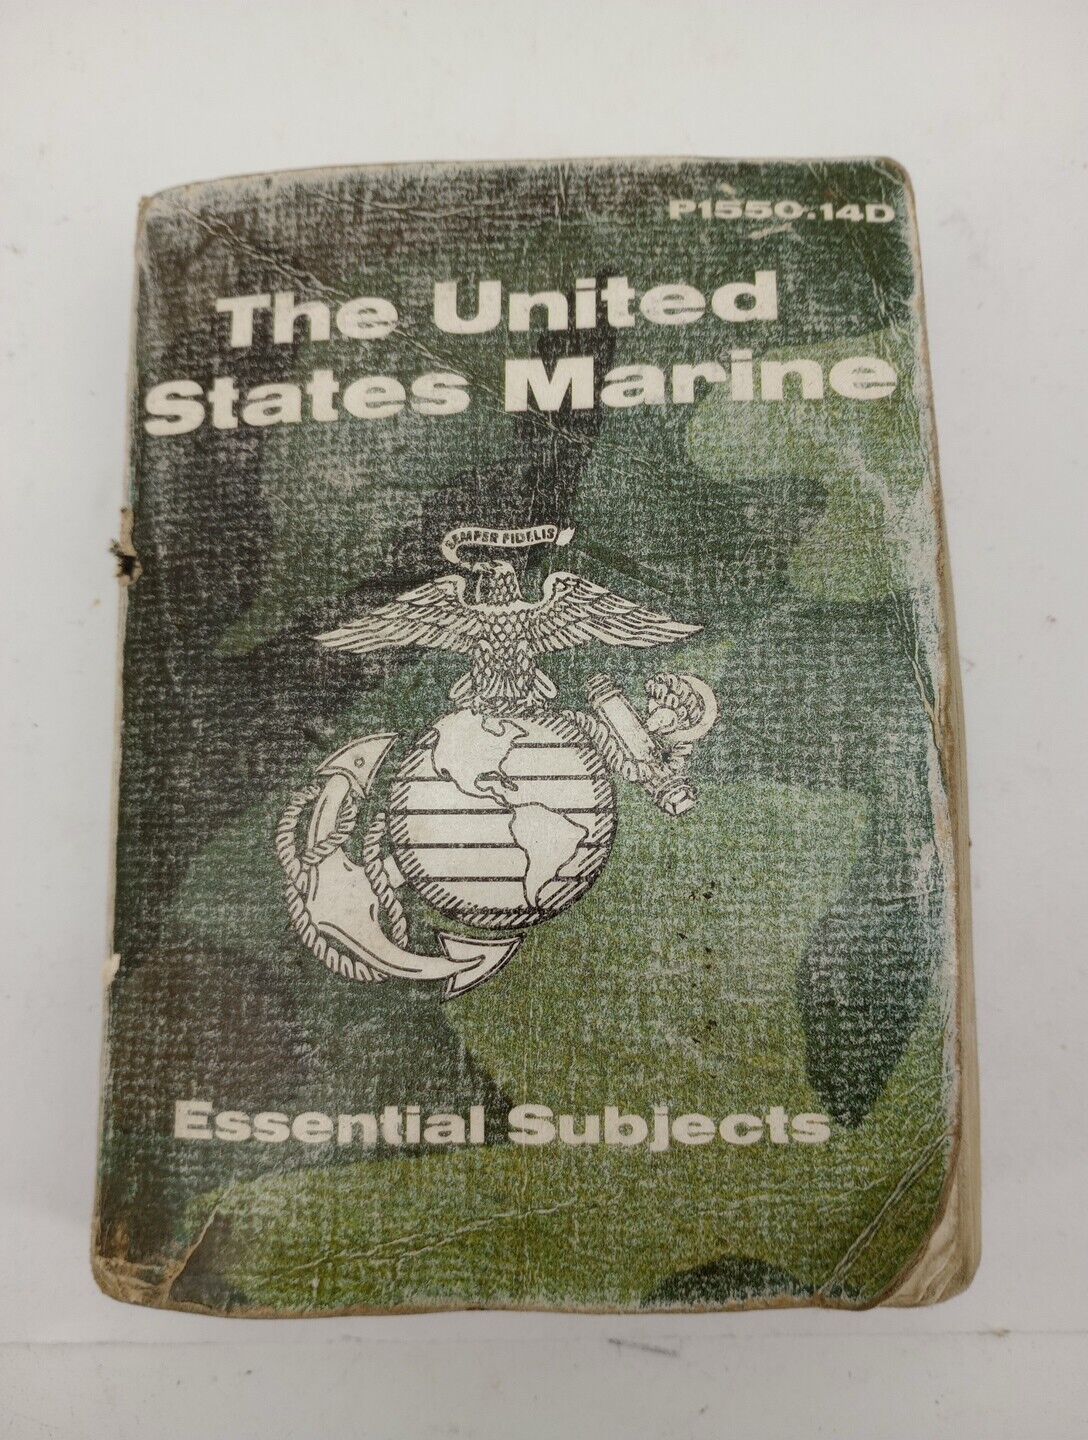 Vtg 1984 The United States Marine Essential Subjects P1550.14D Military Book